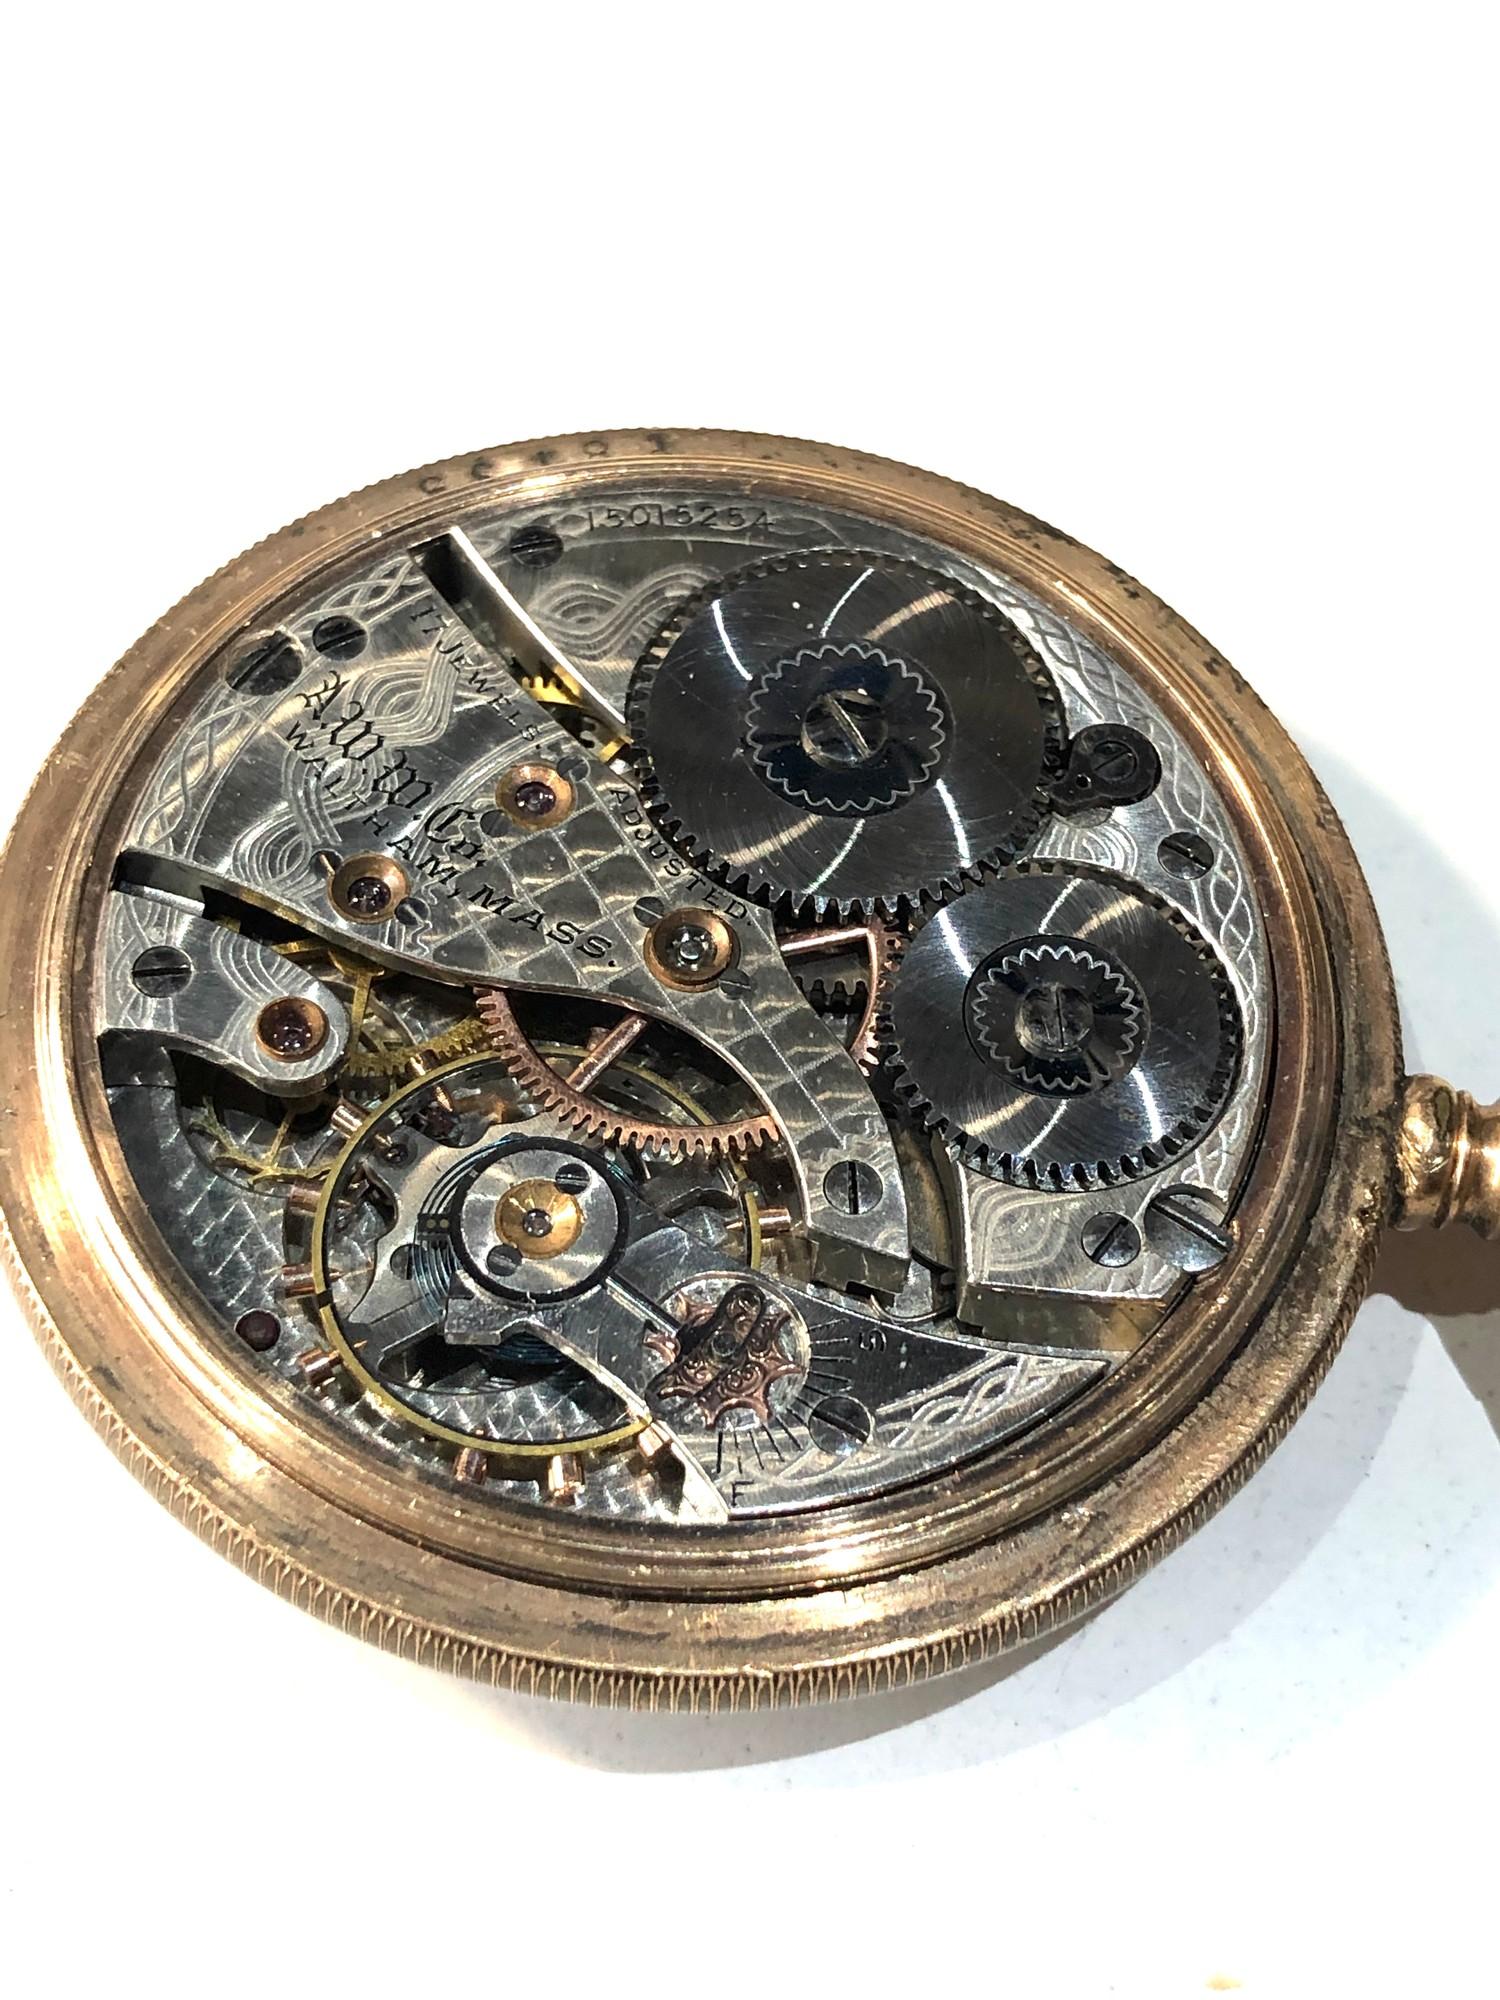 Antique gold plated cased waltham pocket watch balance will spin fully wound but sold as parts - Image 3 of 4